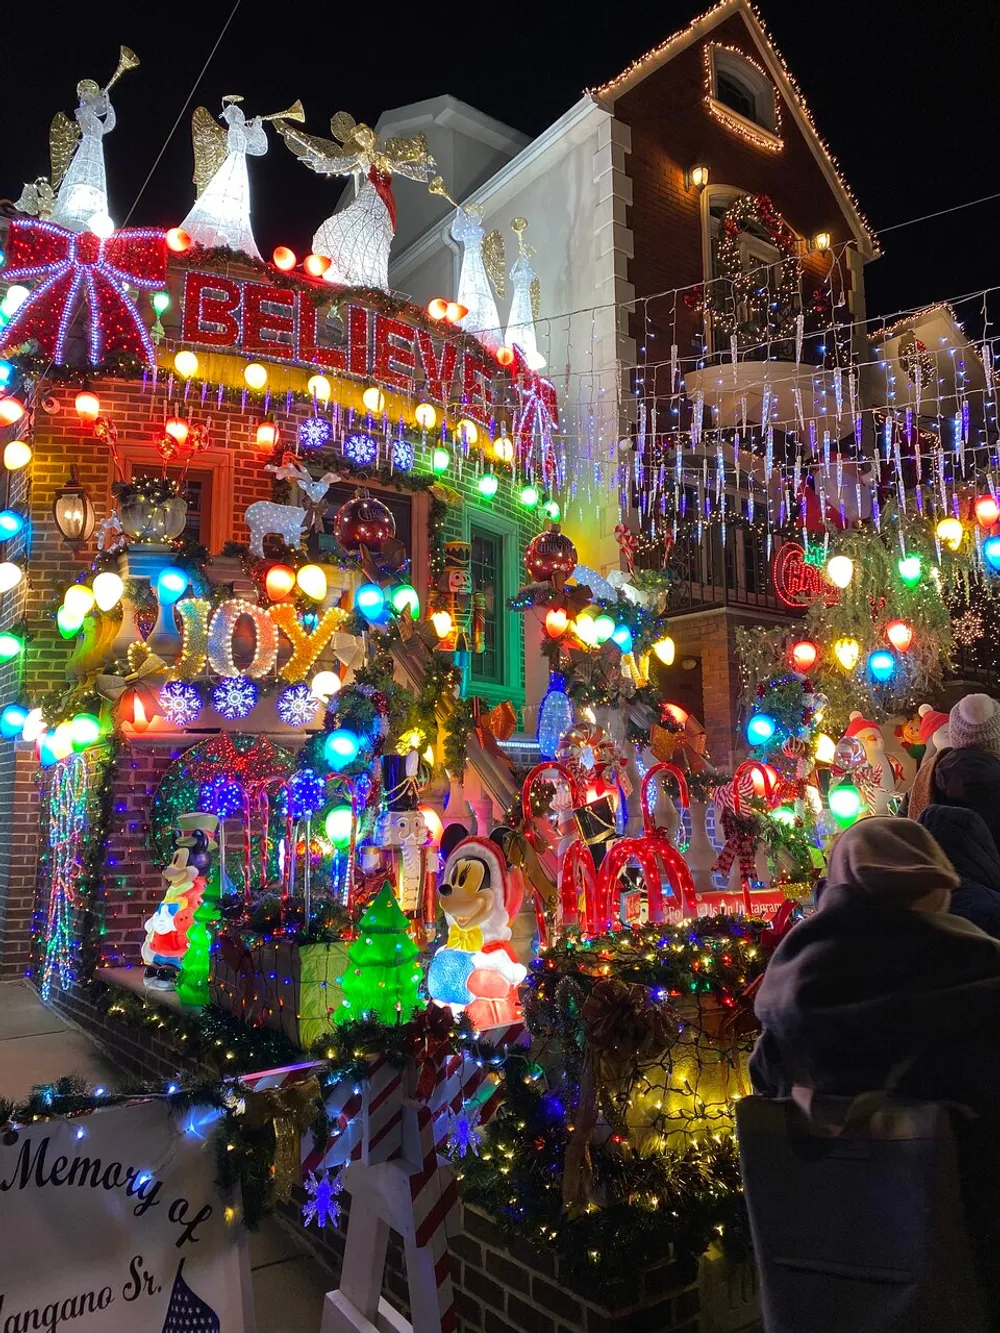 The image shows a house extravagantly decorated with colorful Christmas lights festive ornaments and figures such as angels and Disney characters observed by onlookers in the foreground